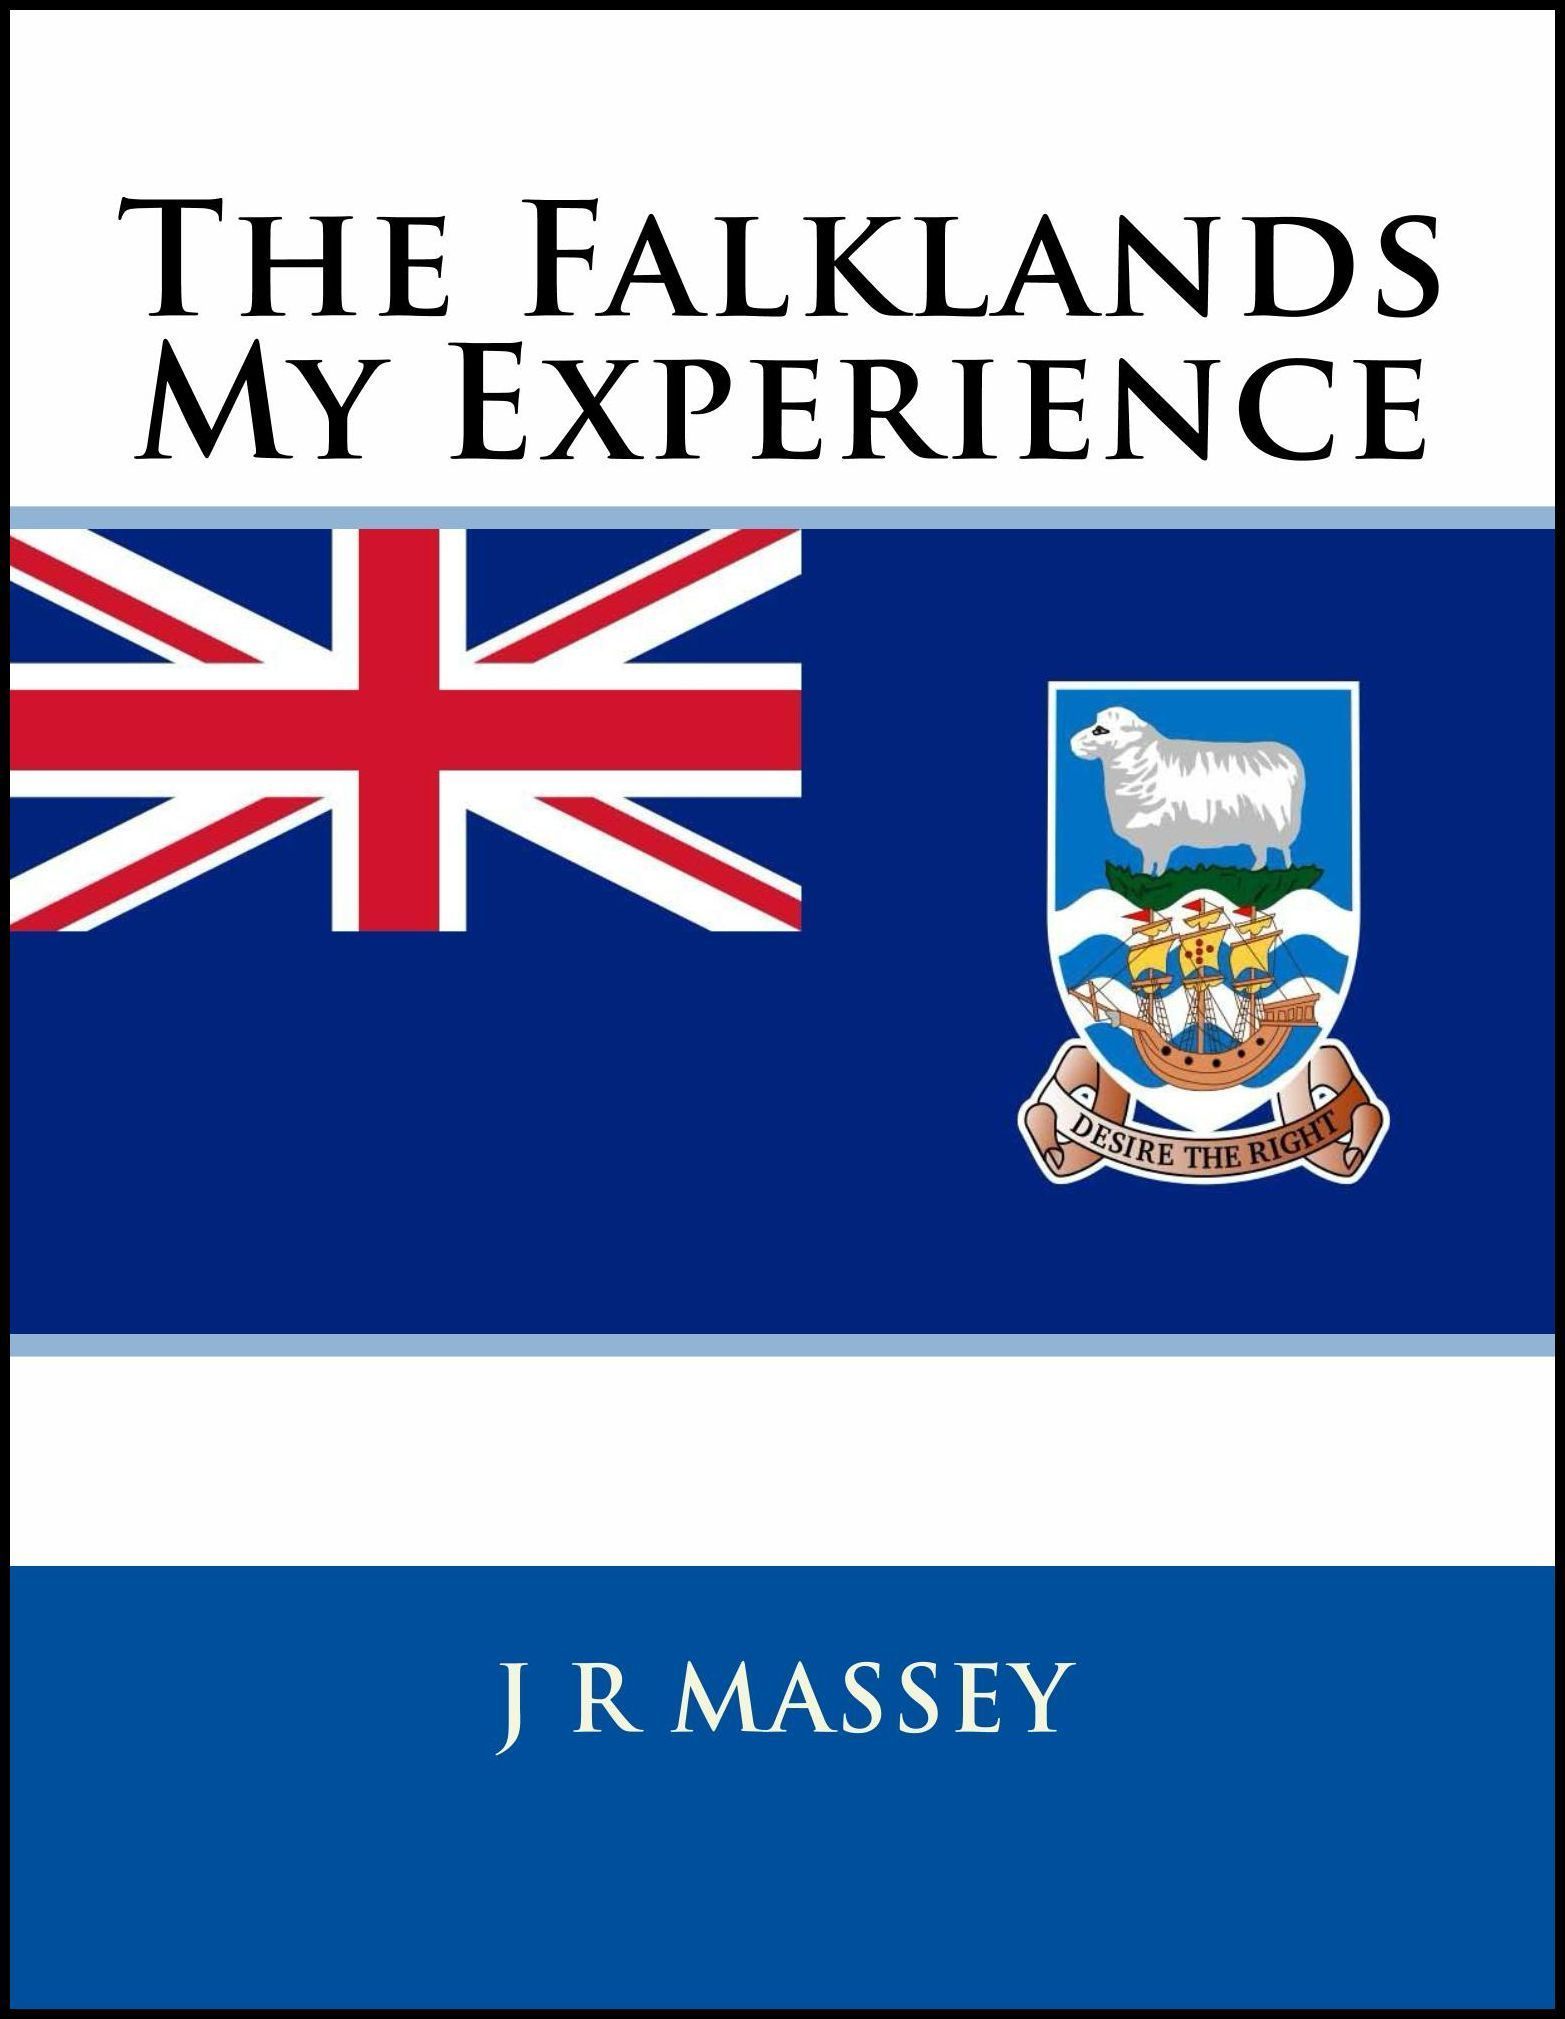 The Falklands:My Experience by J R Massey